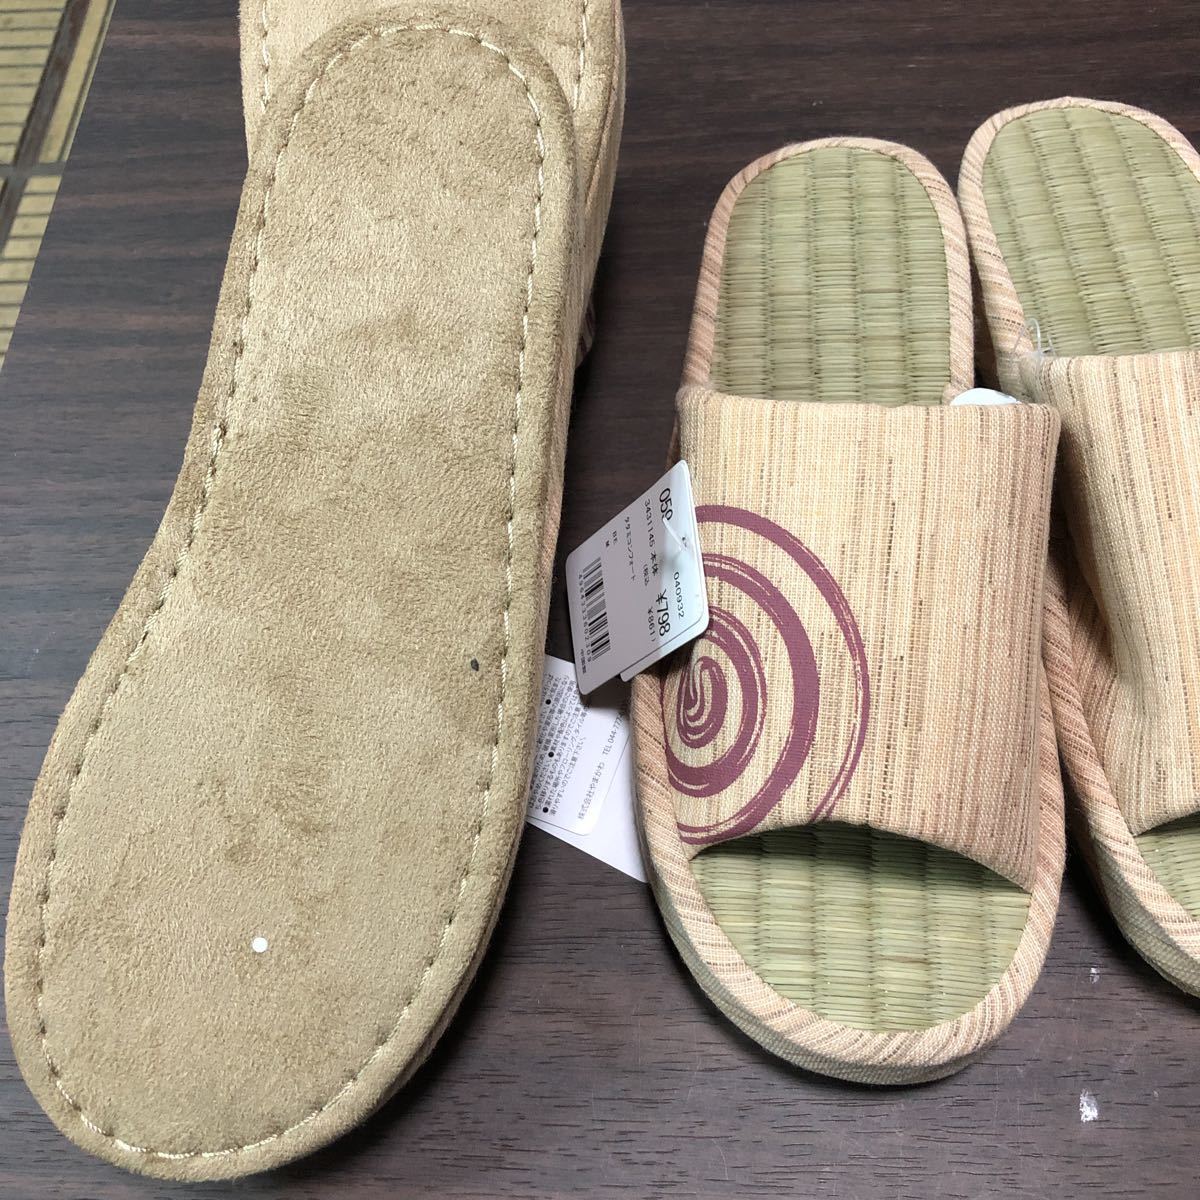  woman slippers comfort tatami heaven M size bottom. height 24cm width 9cm thickness 3.5cm 4 pair .2000 jpy zims